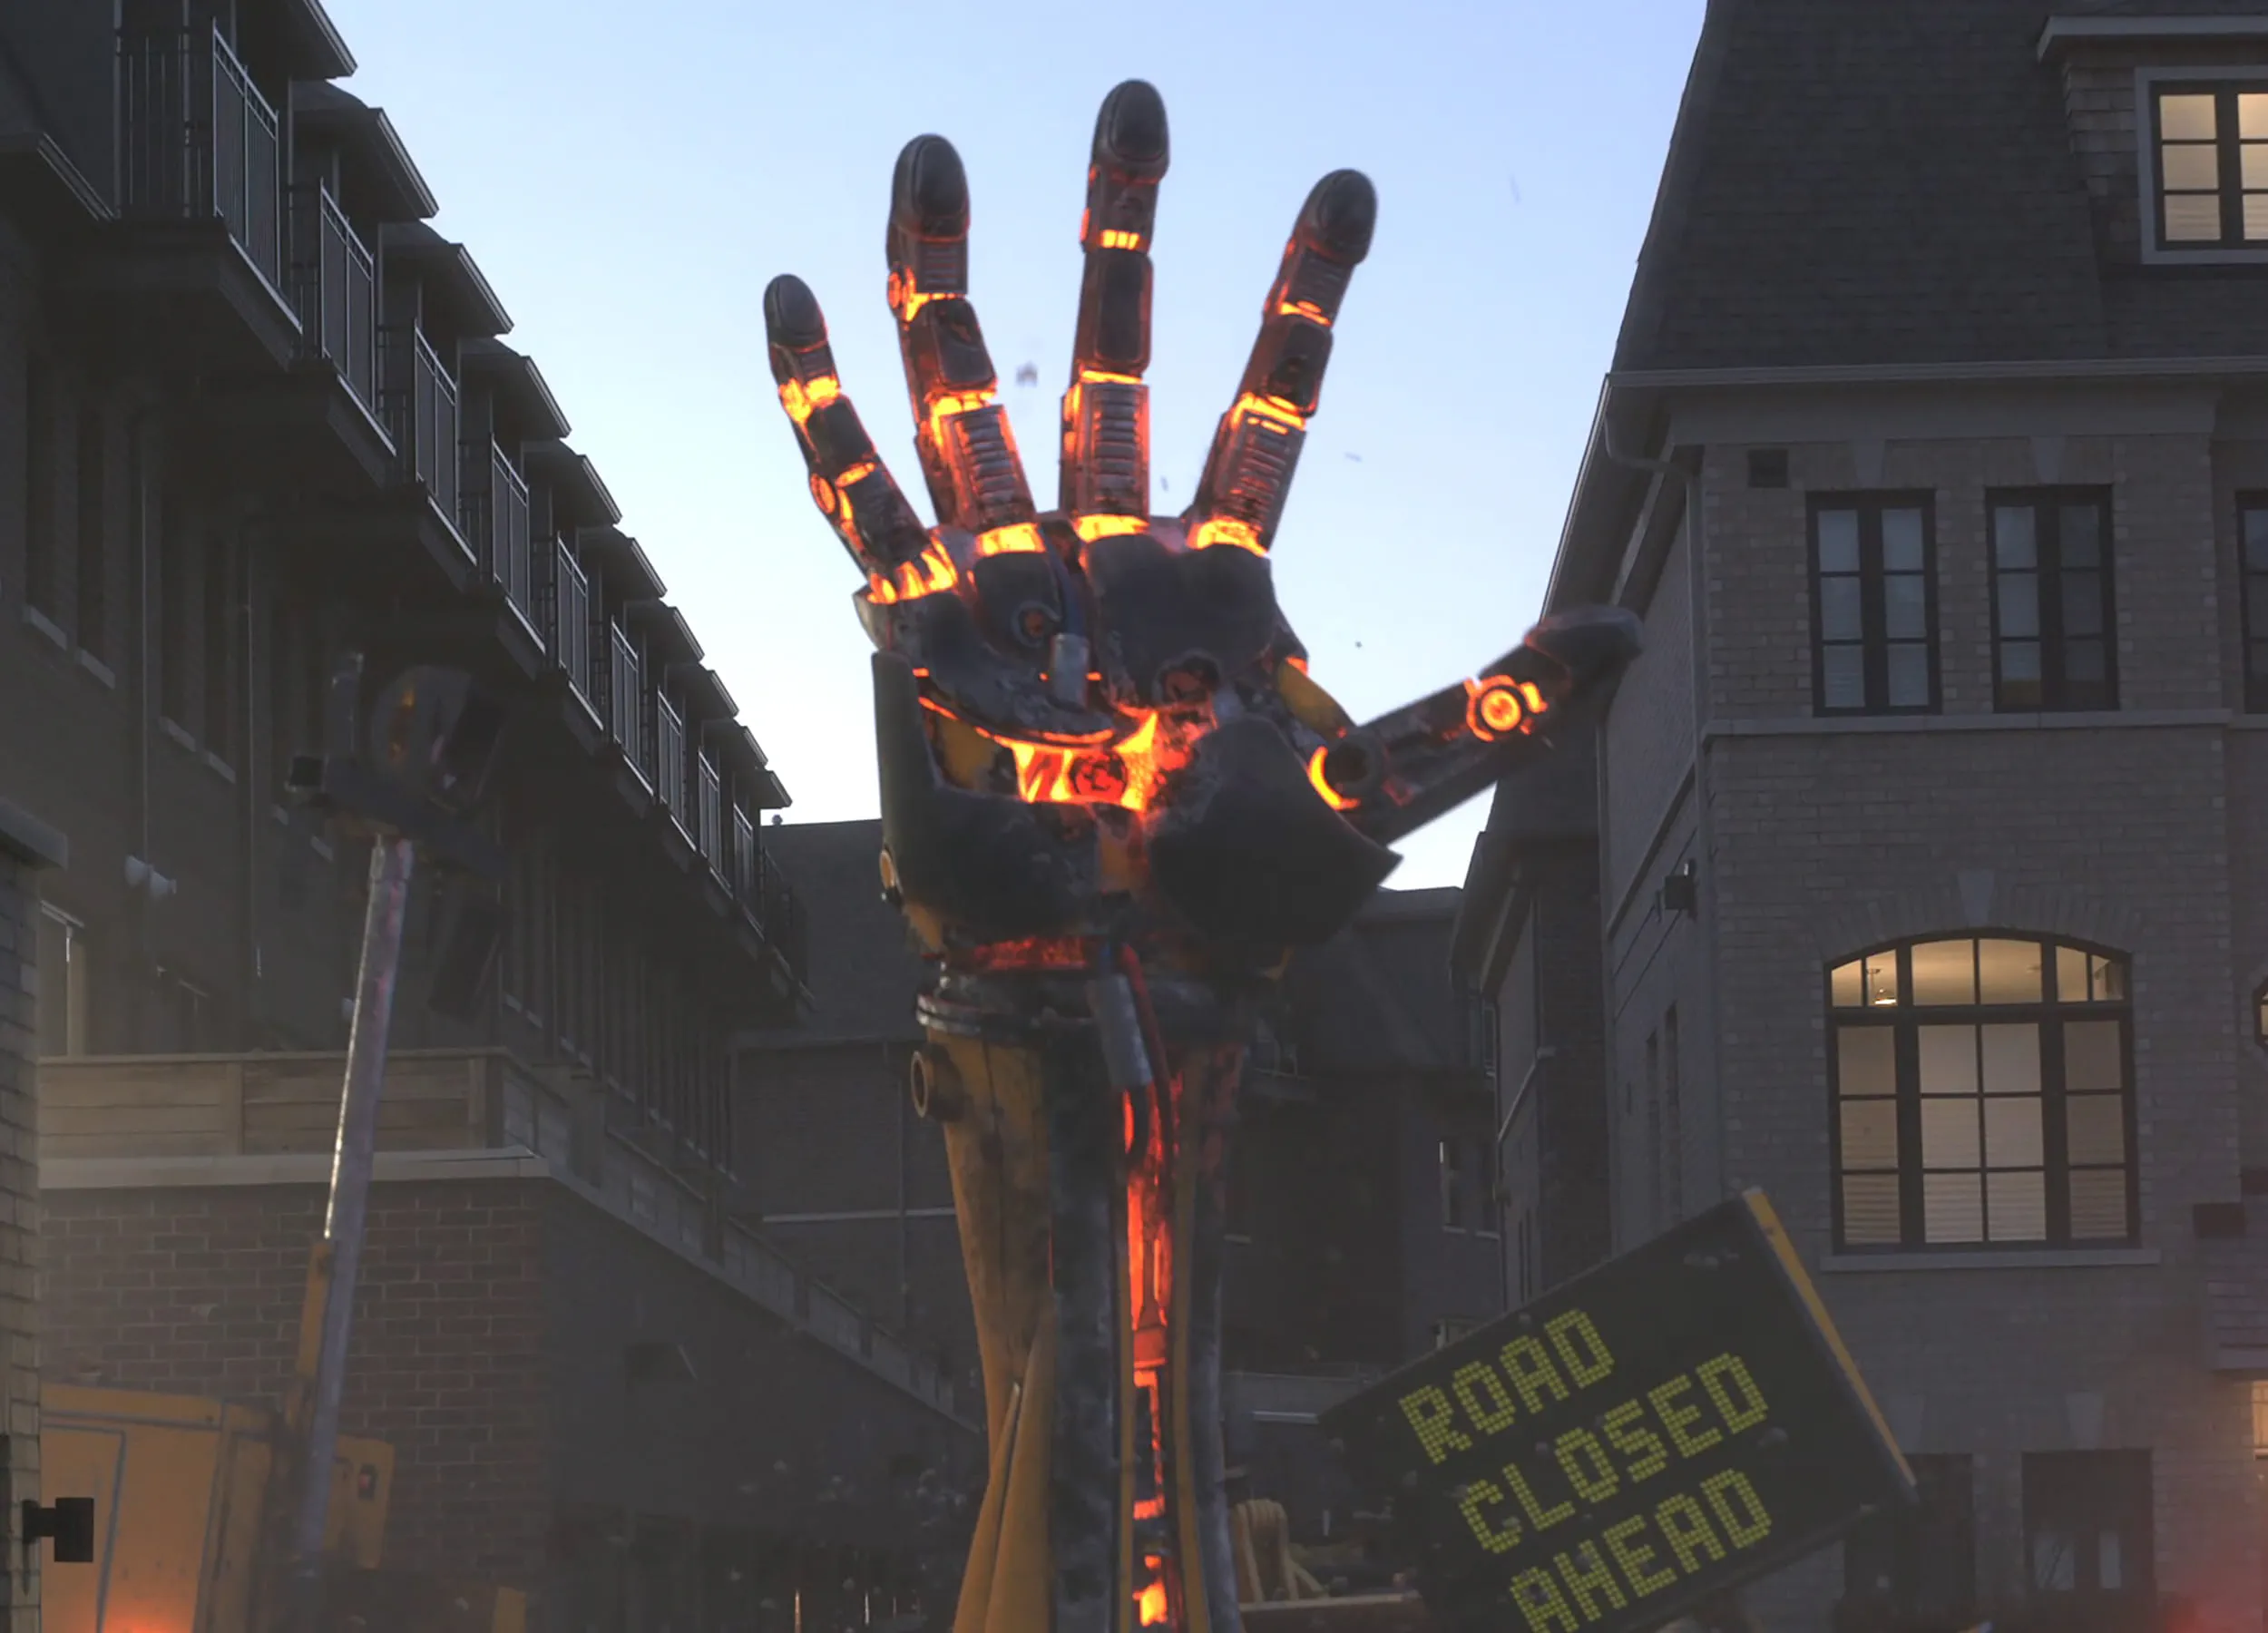 Visual effects animation of a giant, fiery robotic hand reaching up in front of buildings